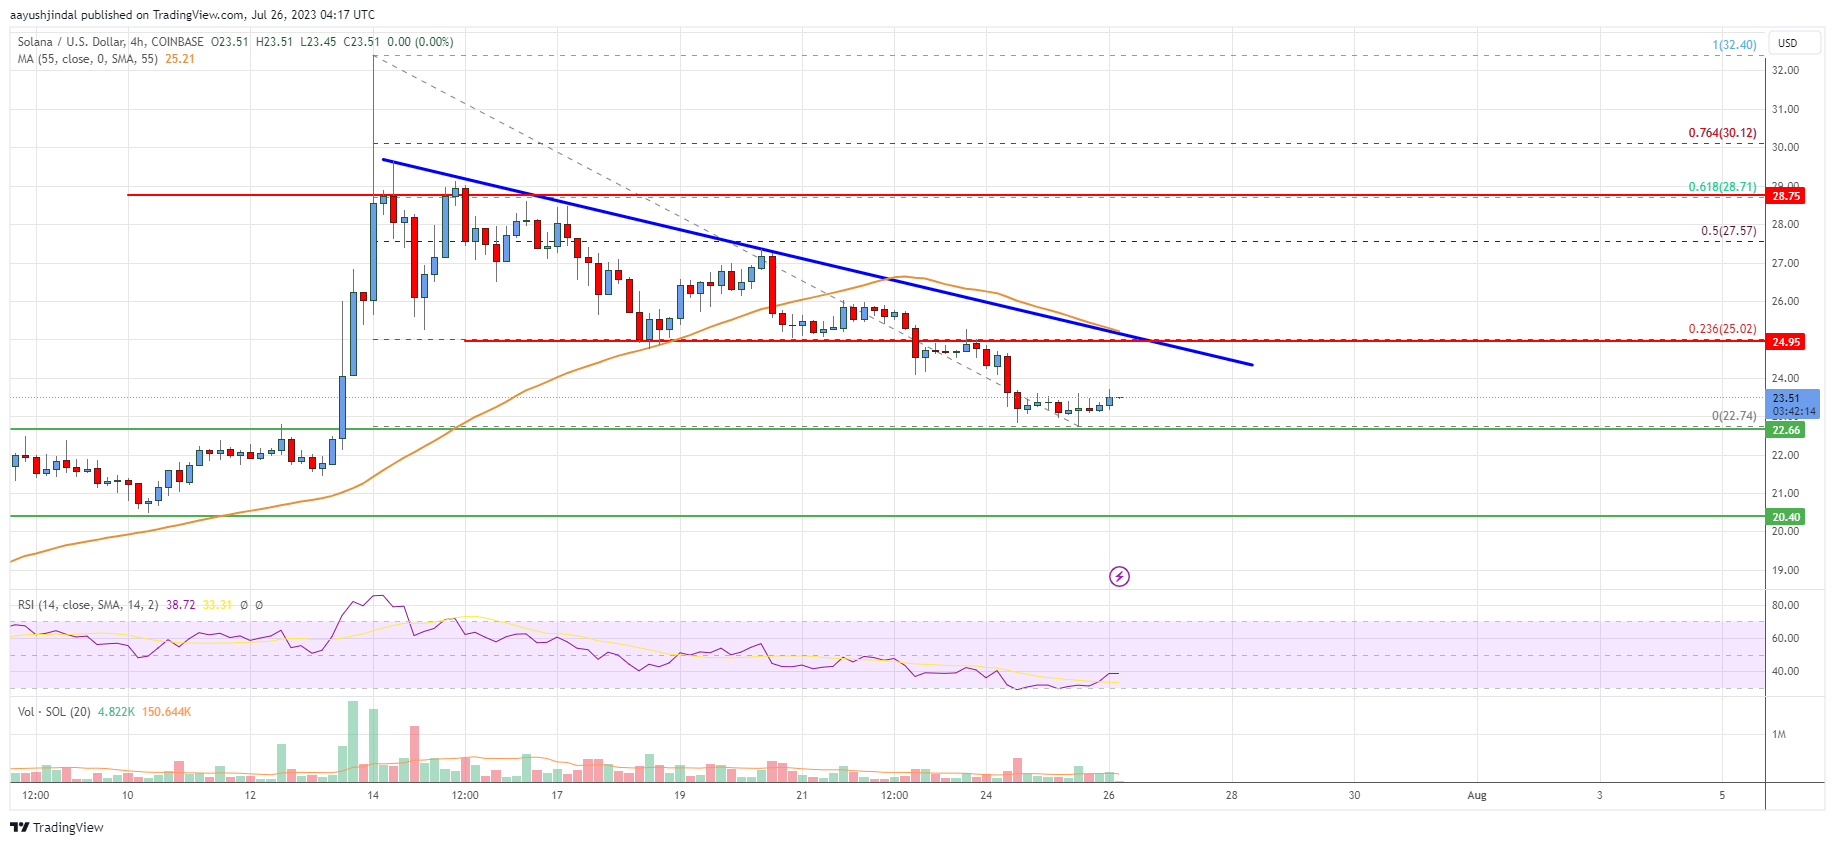 Solana (SOL) Price Analysis: Key Support Nearby At $22.75